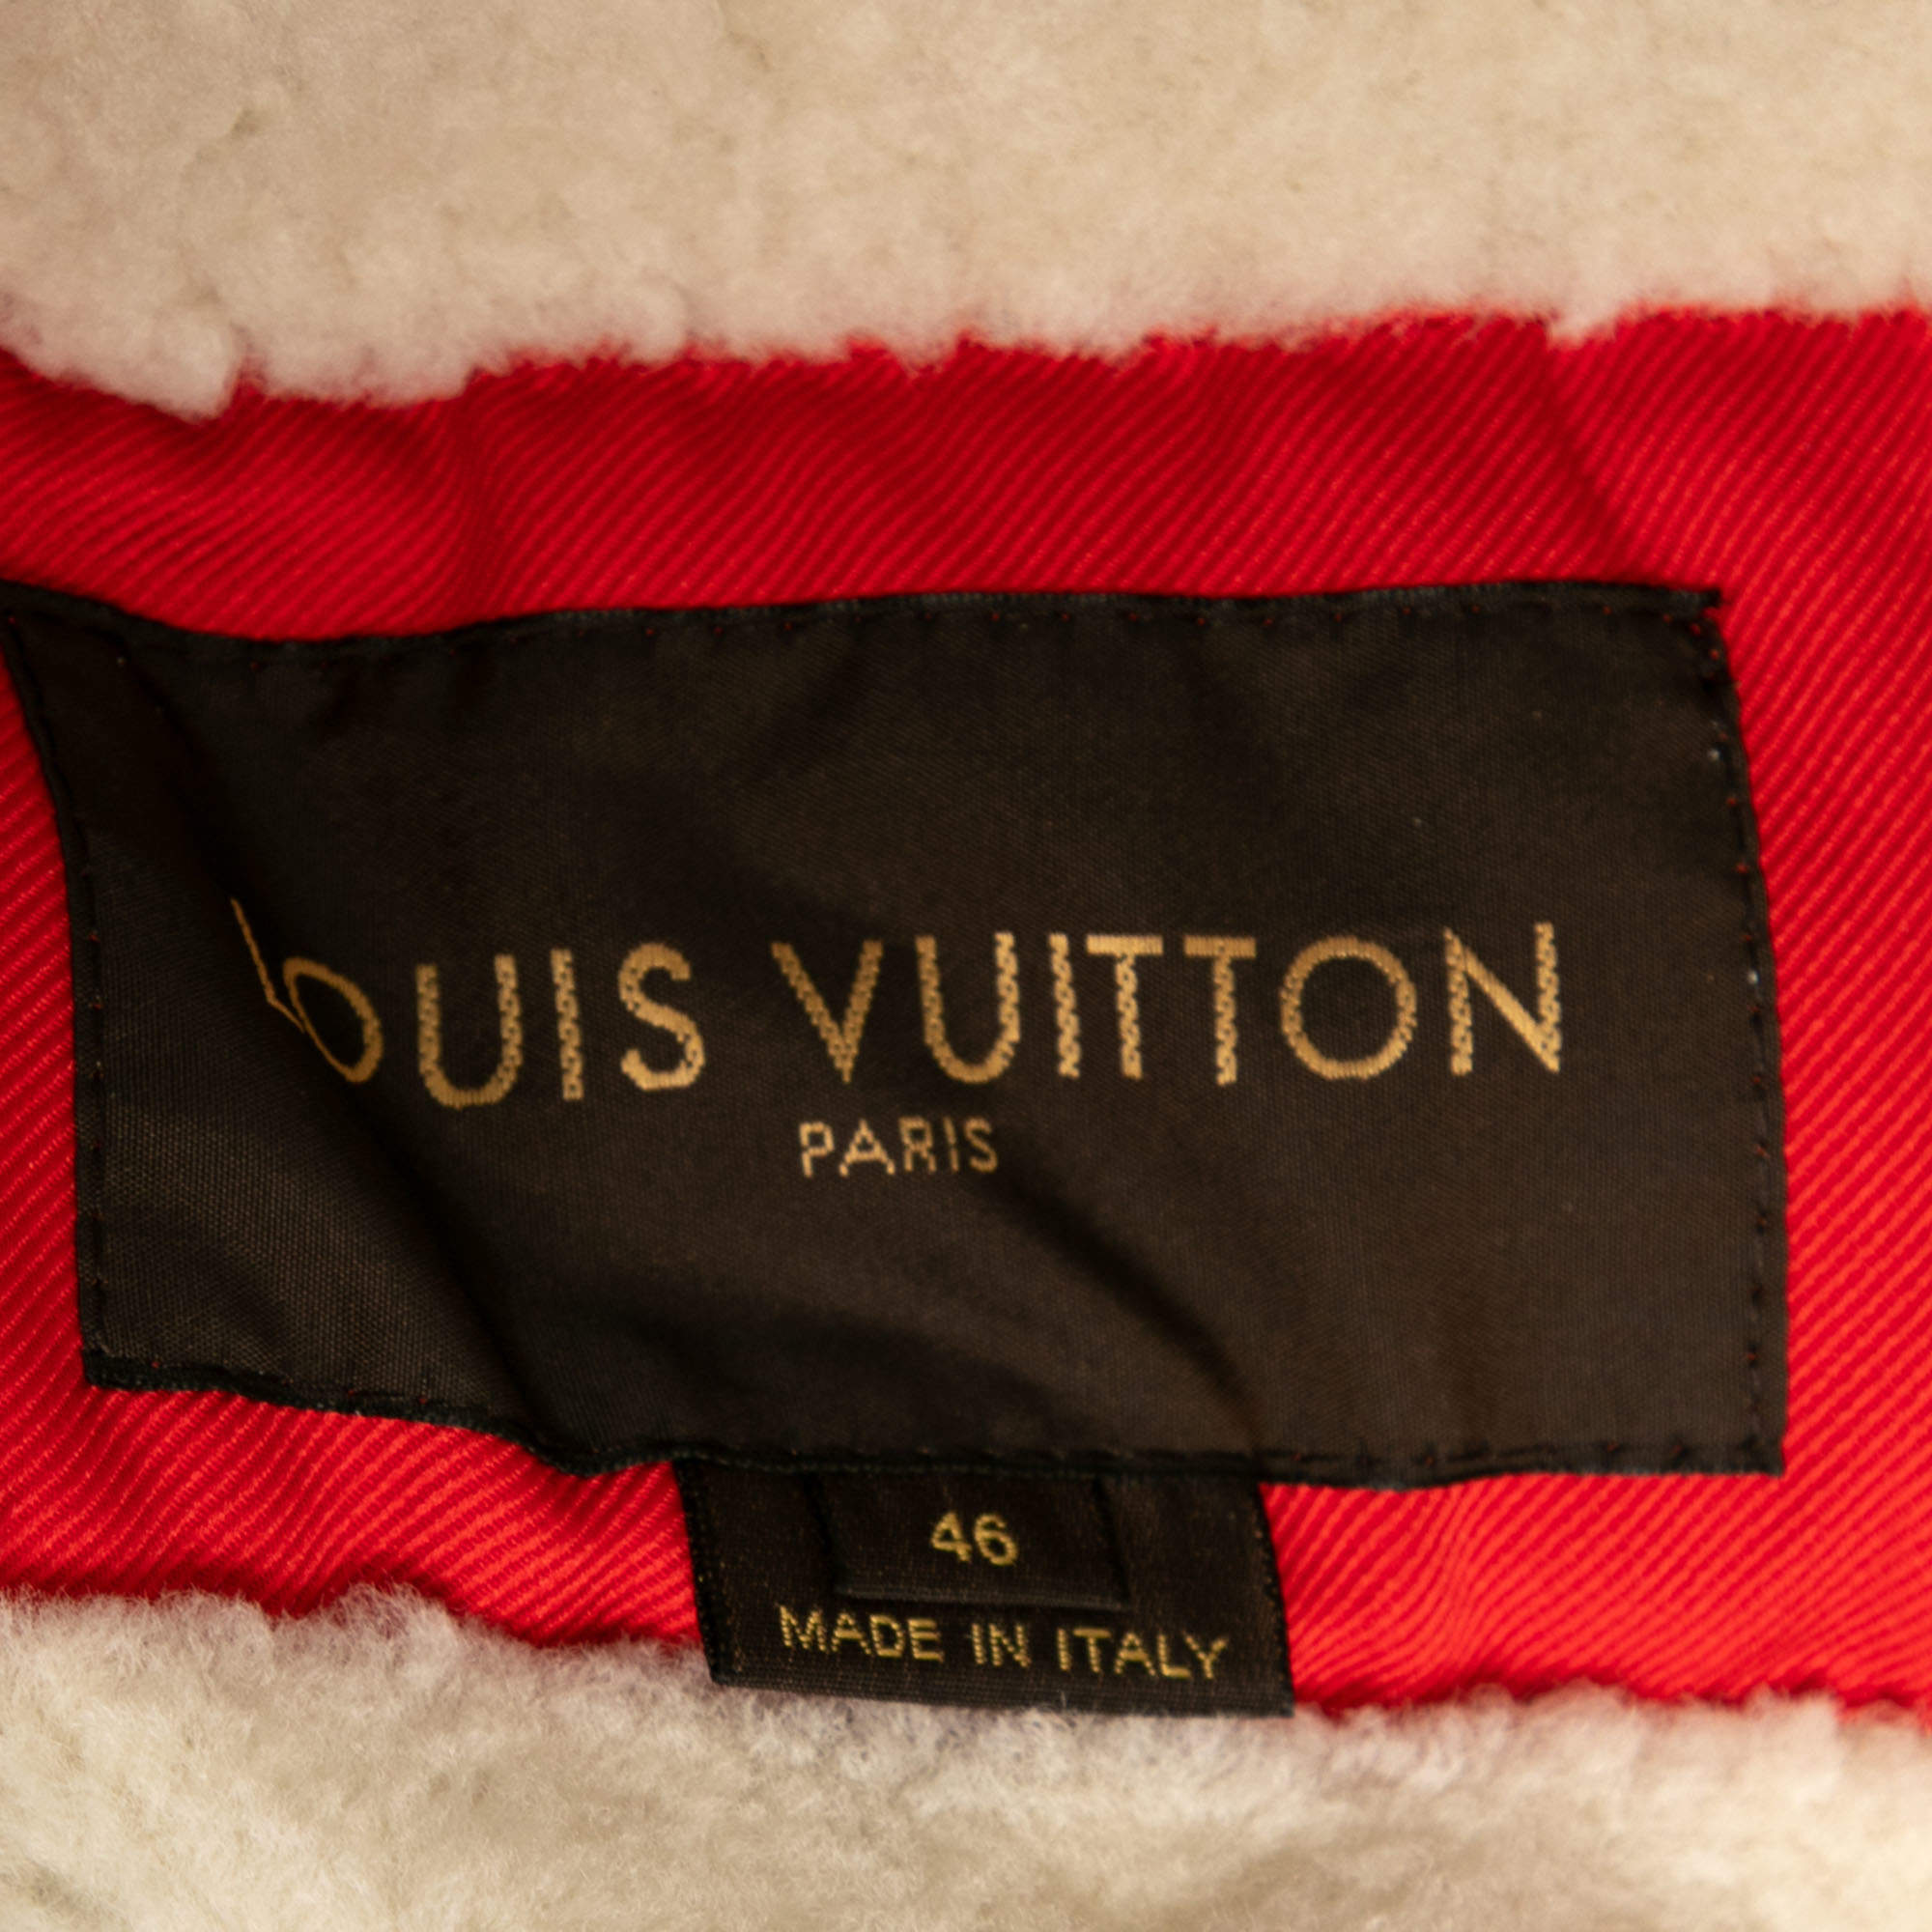 Louis Vuitton Red Cotton & Shearling Lined Zip Front Bomber Jacket